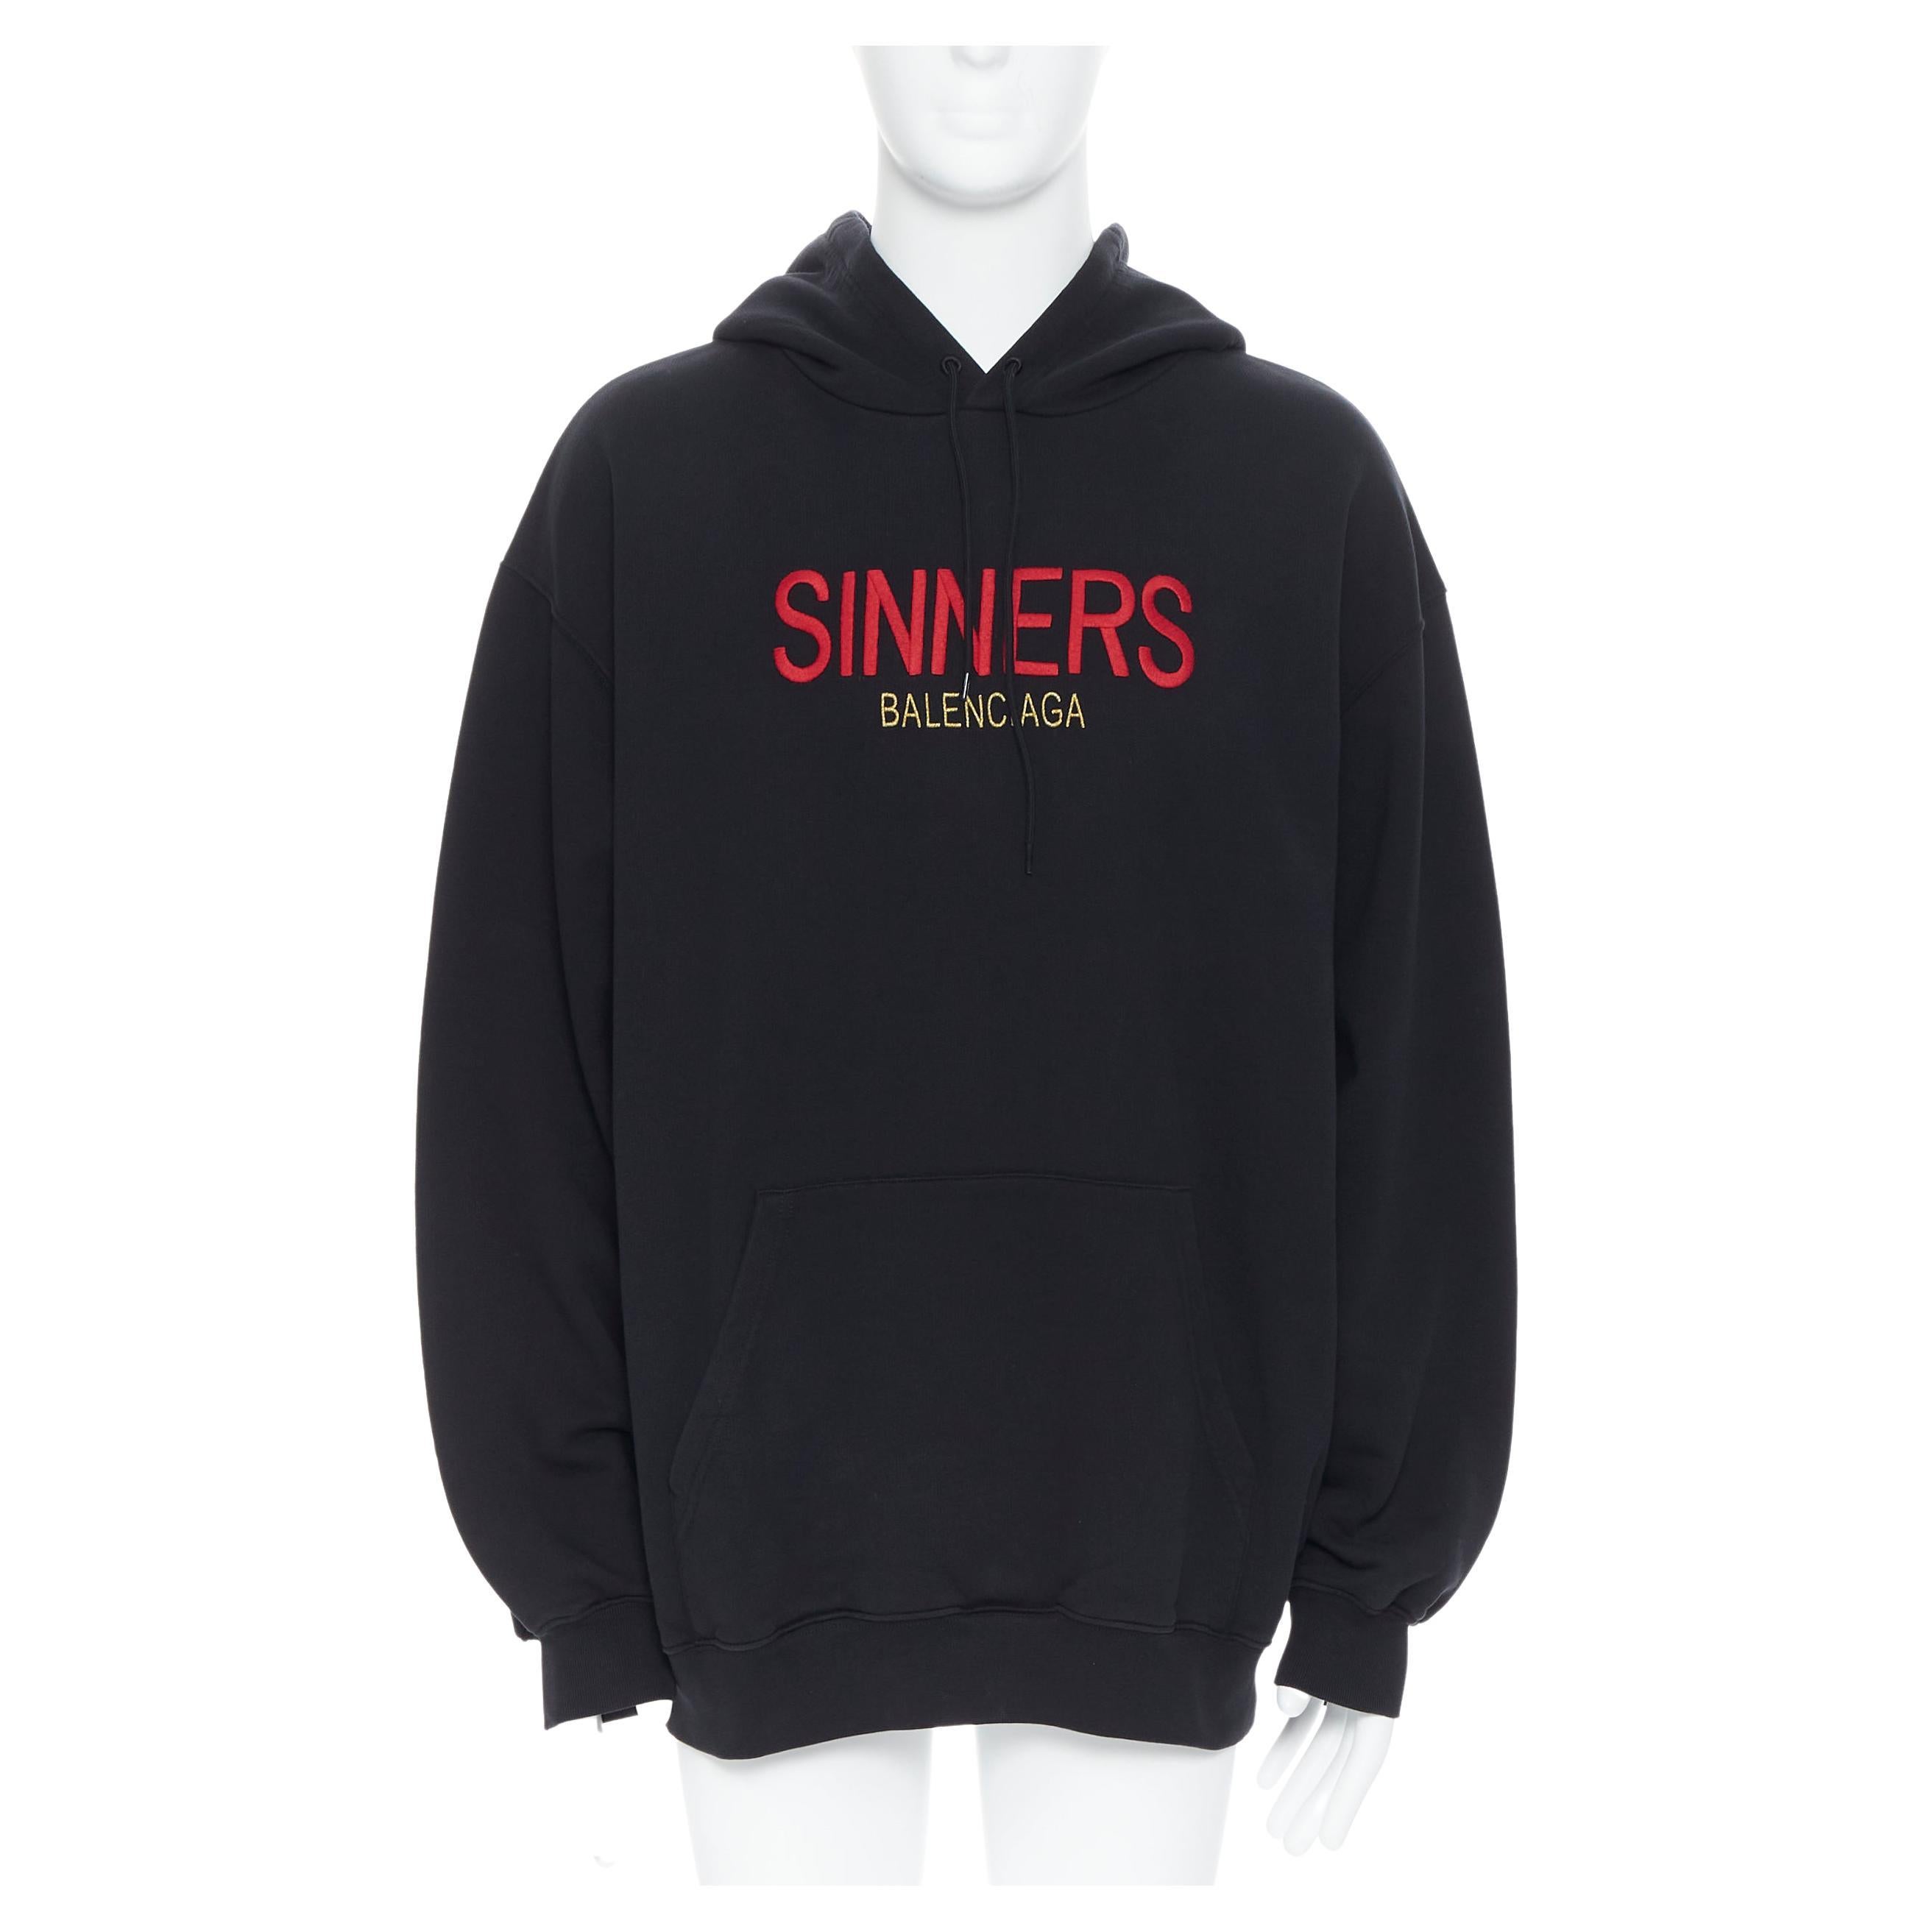 new BALENCIAGA DEMNA 2018 Sinners logo embroidery black cotton hoodie pullover L